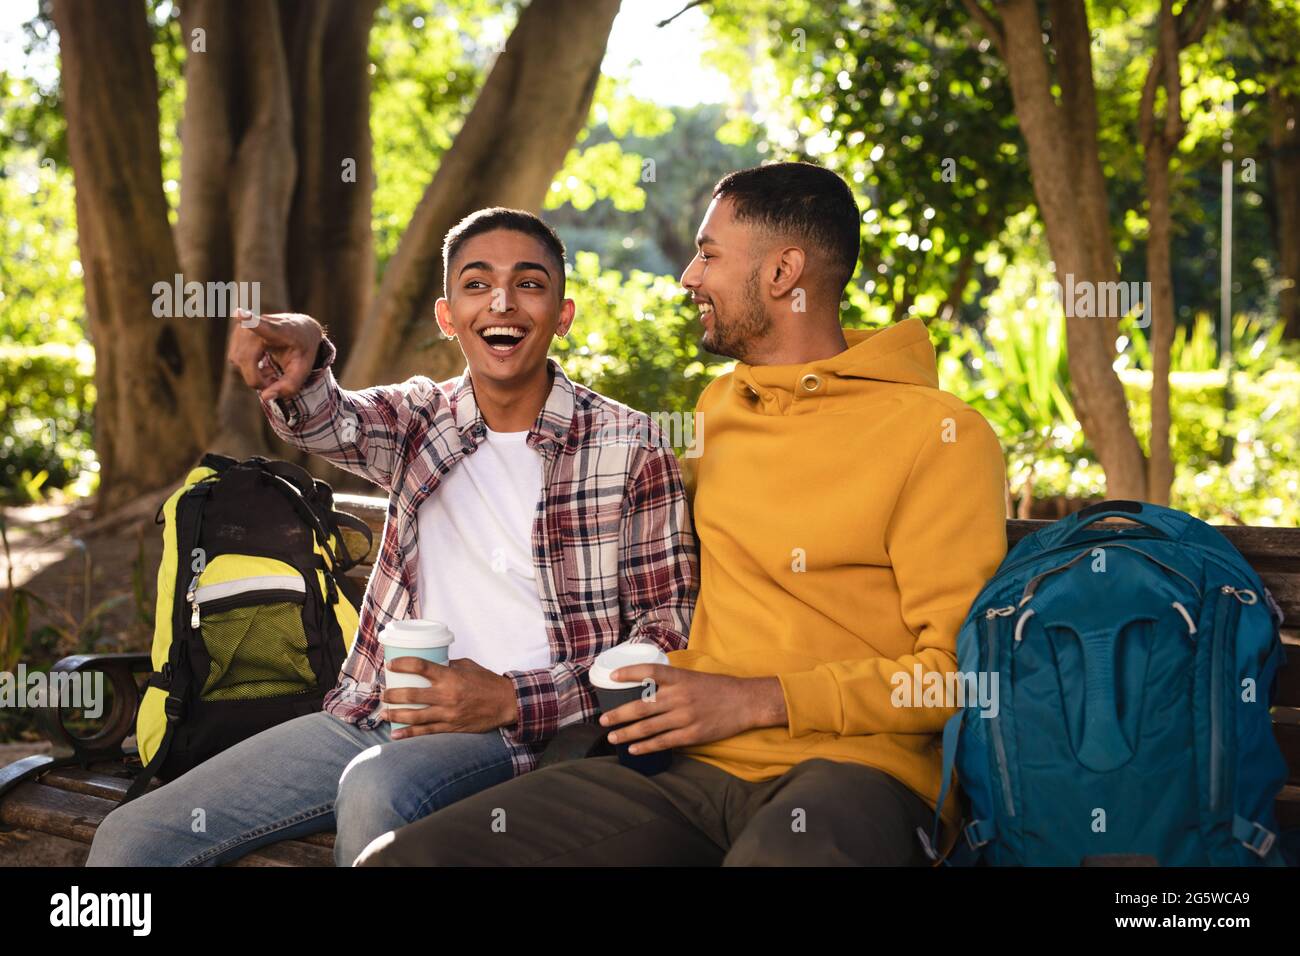 Two happy mixed race male friends sitting on park bench with backpacks, talking Stock Photo